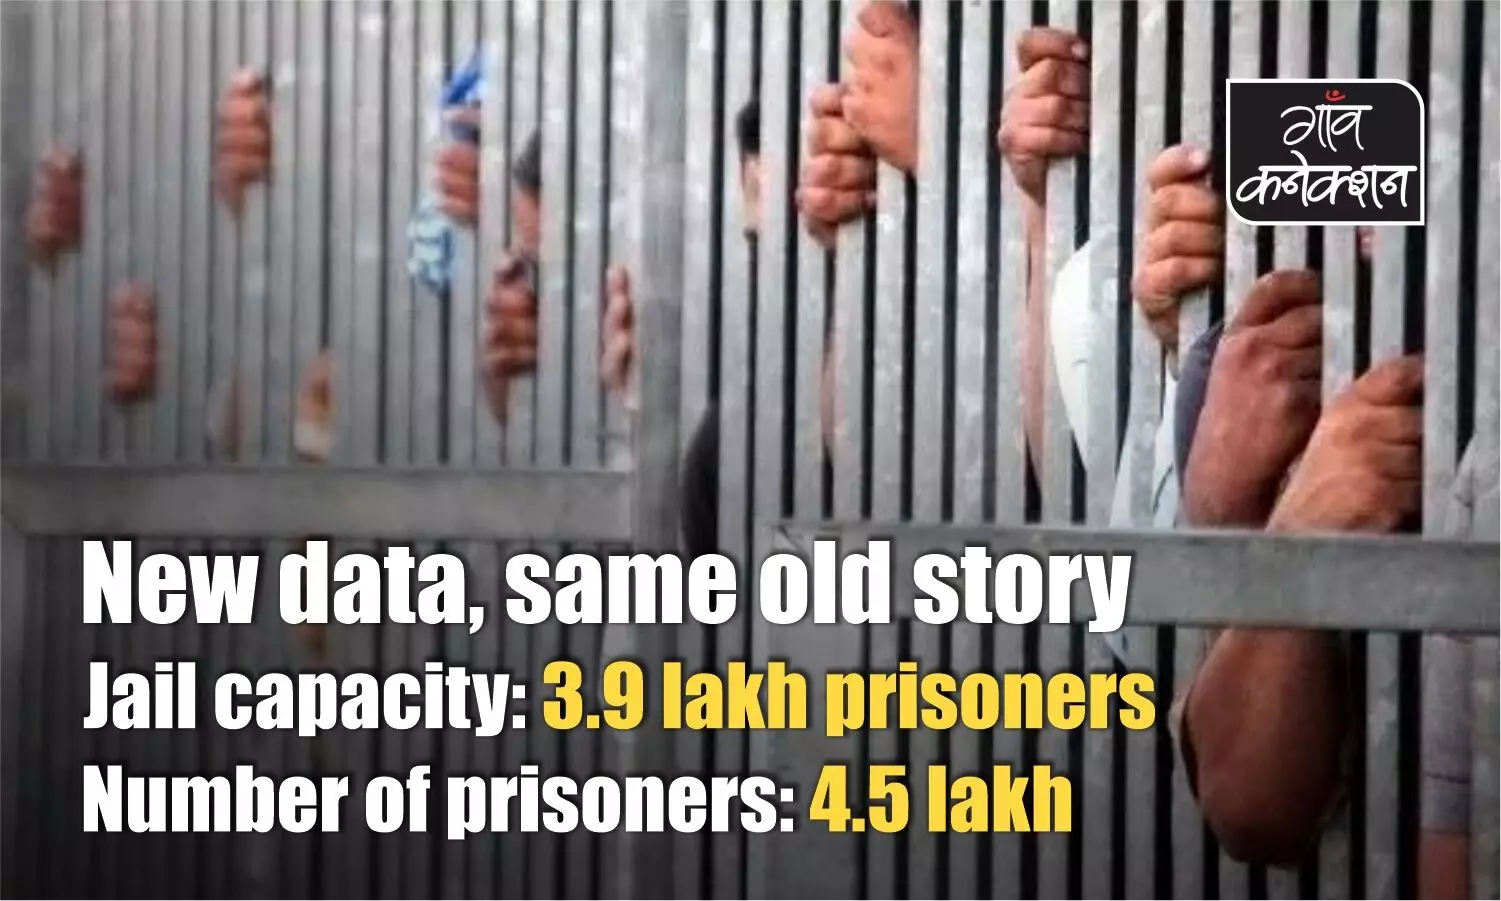 Latest data reveals that jails in the country are packed. Whats new?